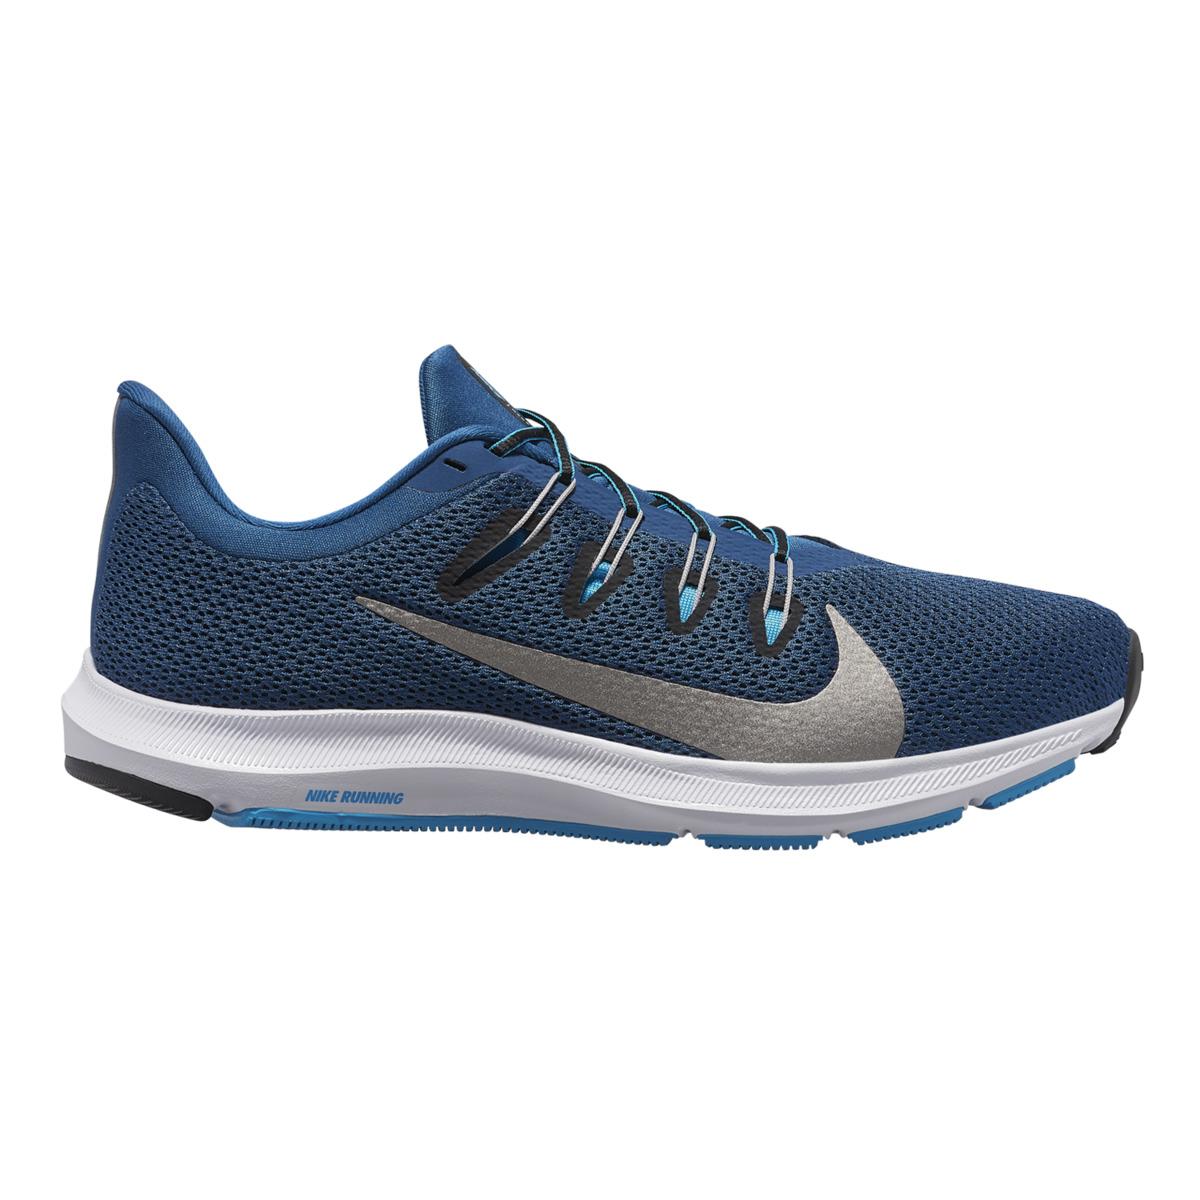 Nike Synthetic Quest 2 Running Shoes in Blue for Men - Lyst